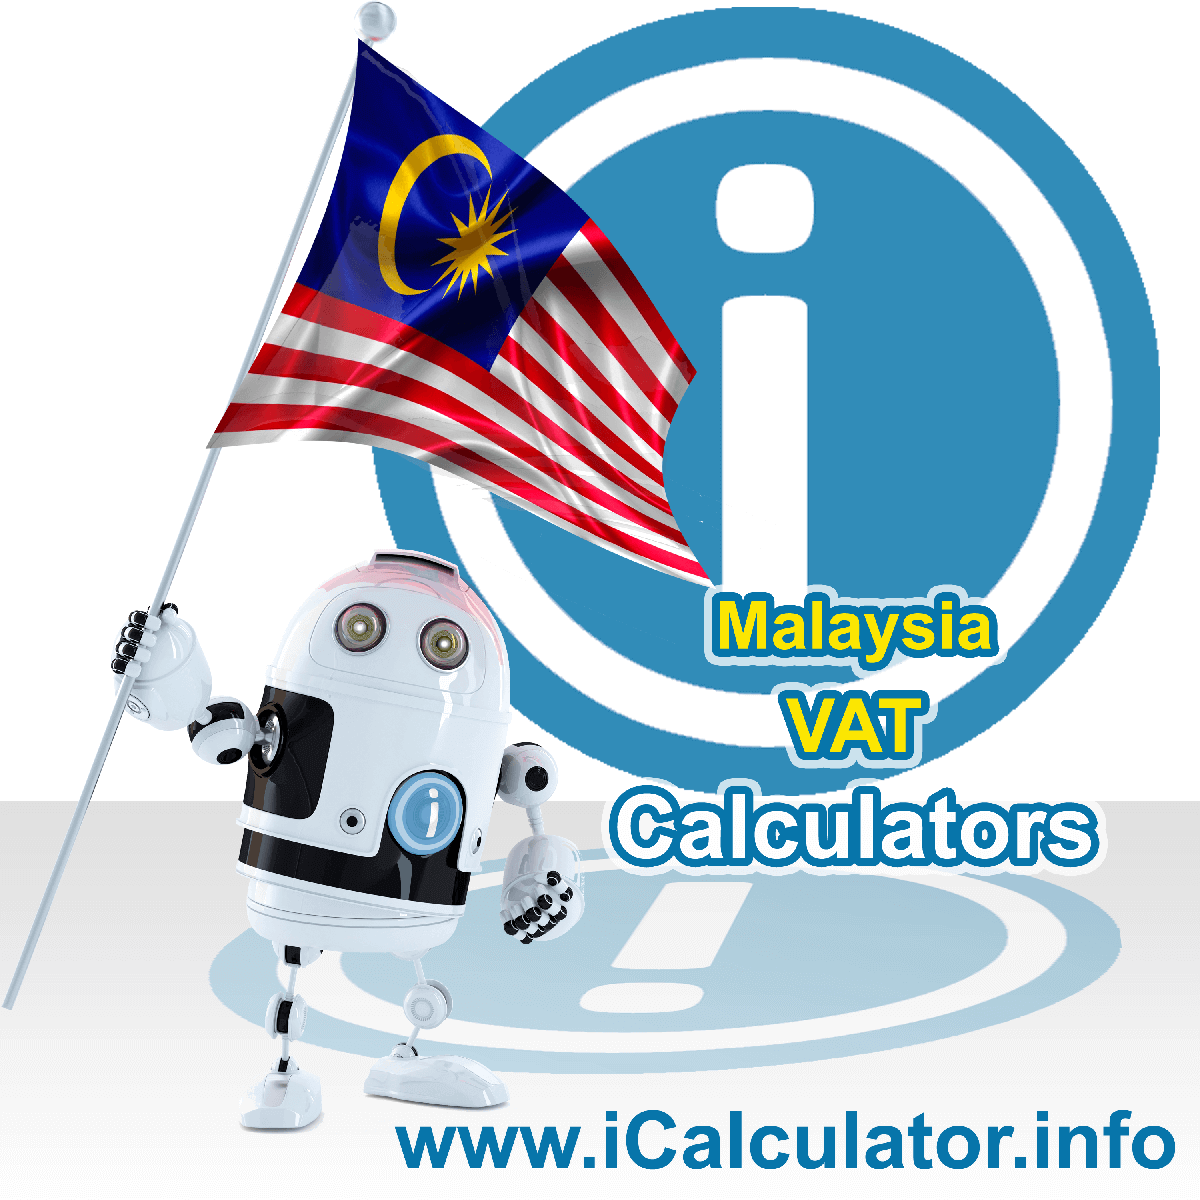 Malaysia VAT Calculator. This image shows the Malaysia flag and information relating to the VAT formula used for calculating Value Added Tax in Malaysia using the Malaysia VAT Calculator in 2023